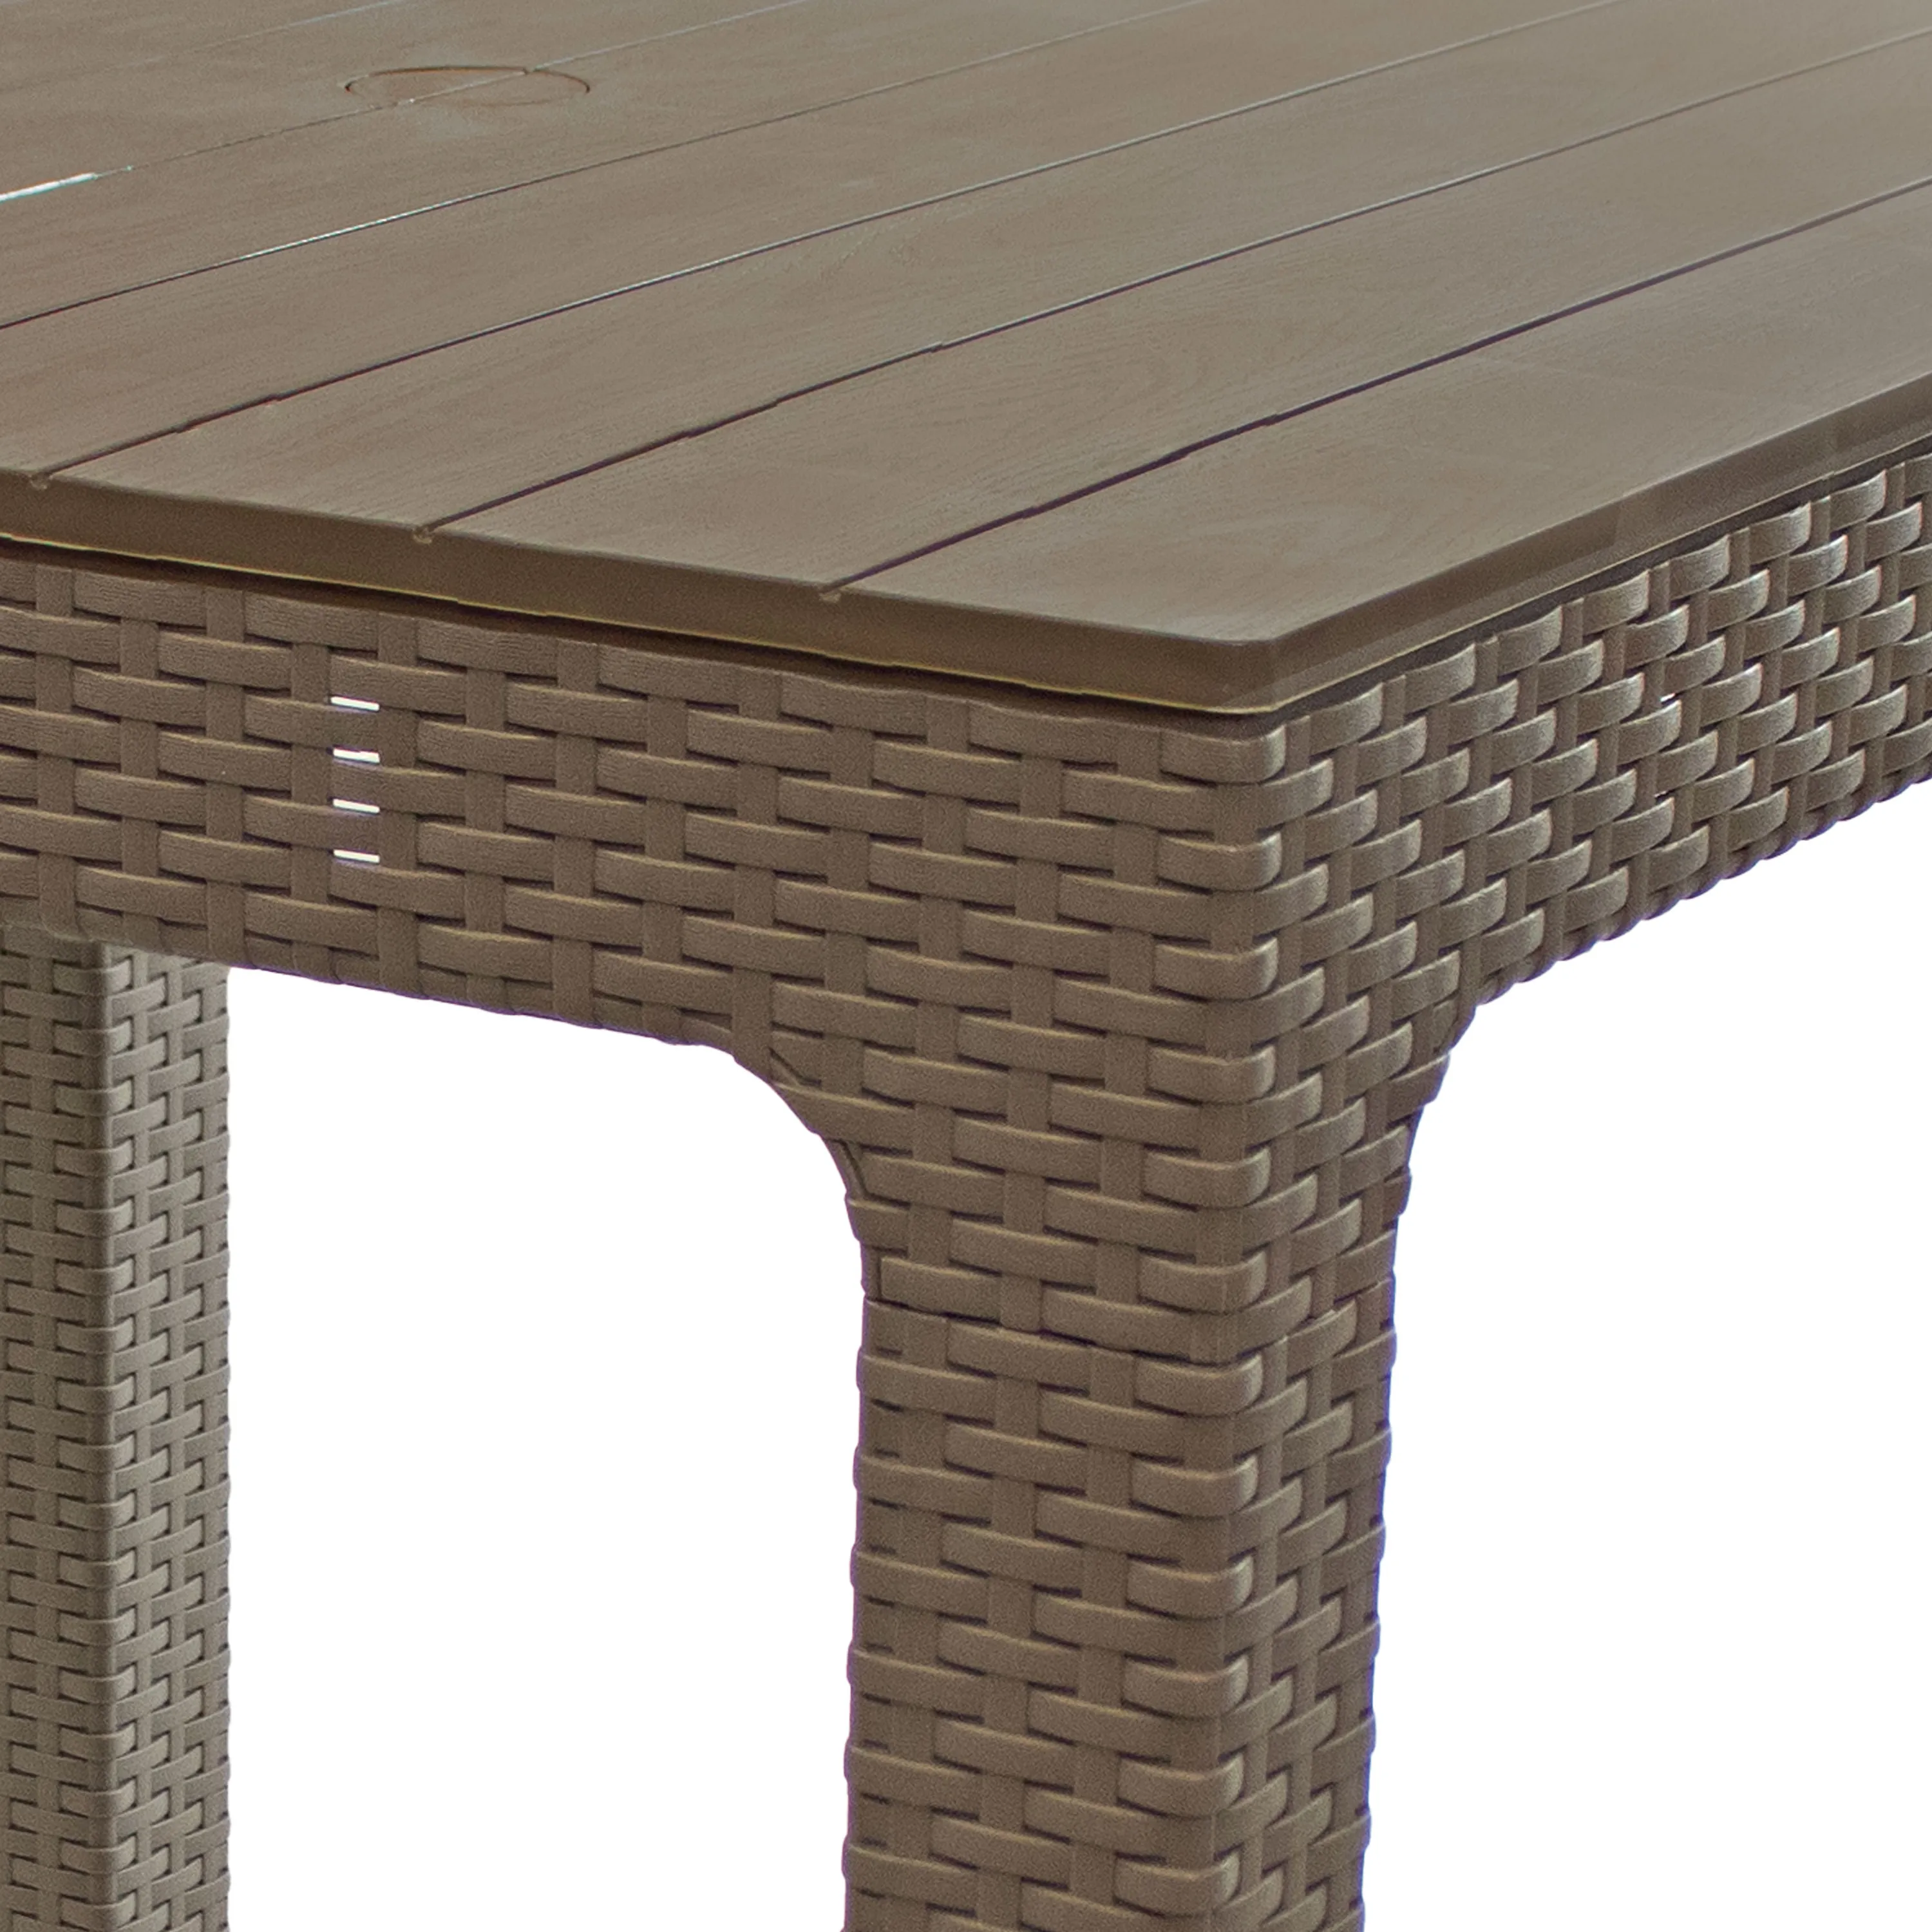 Sunnydaze Square Polypropylene Outdoor Dining Table - Champagne - 29.5 in